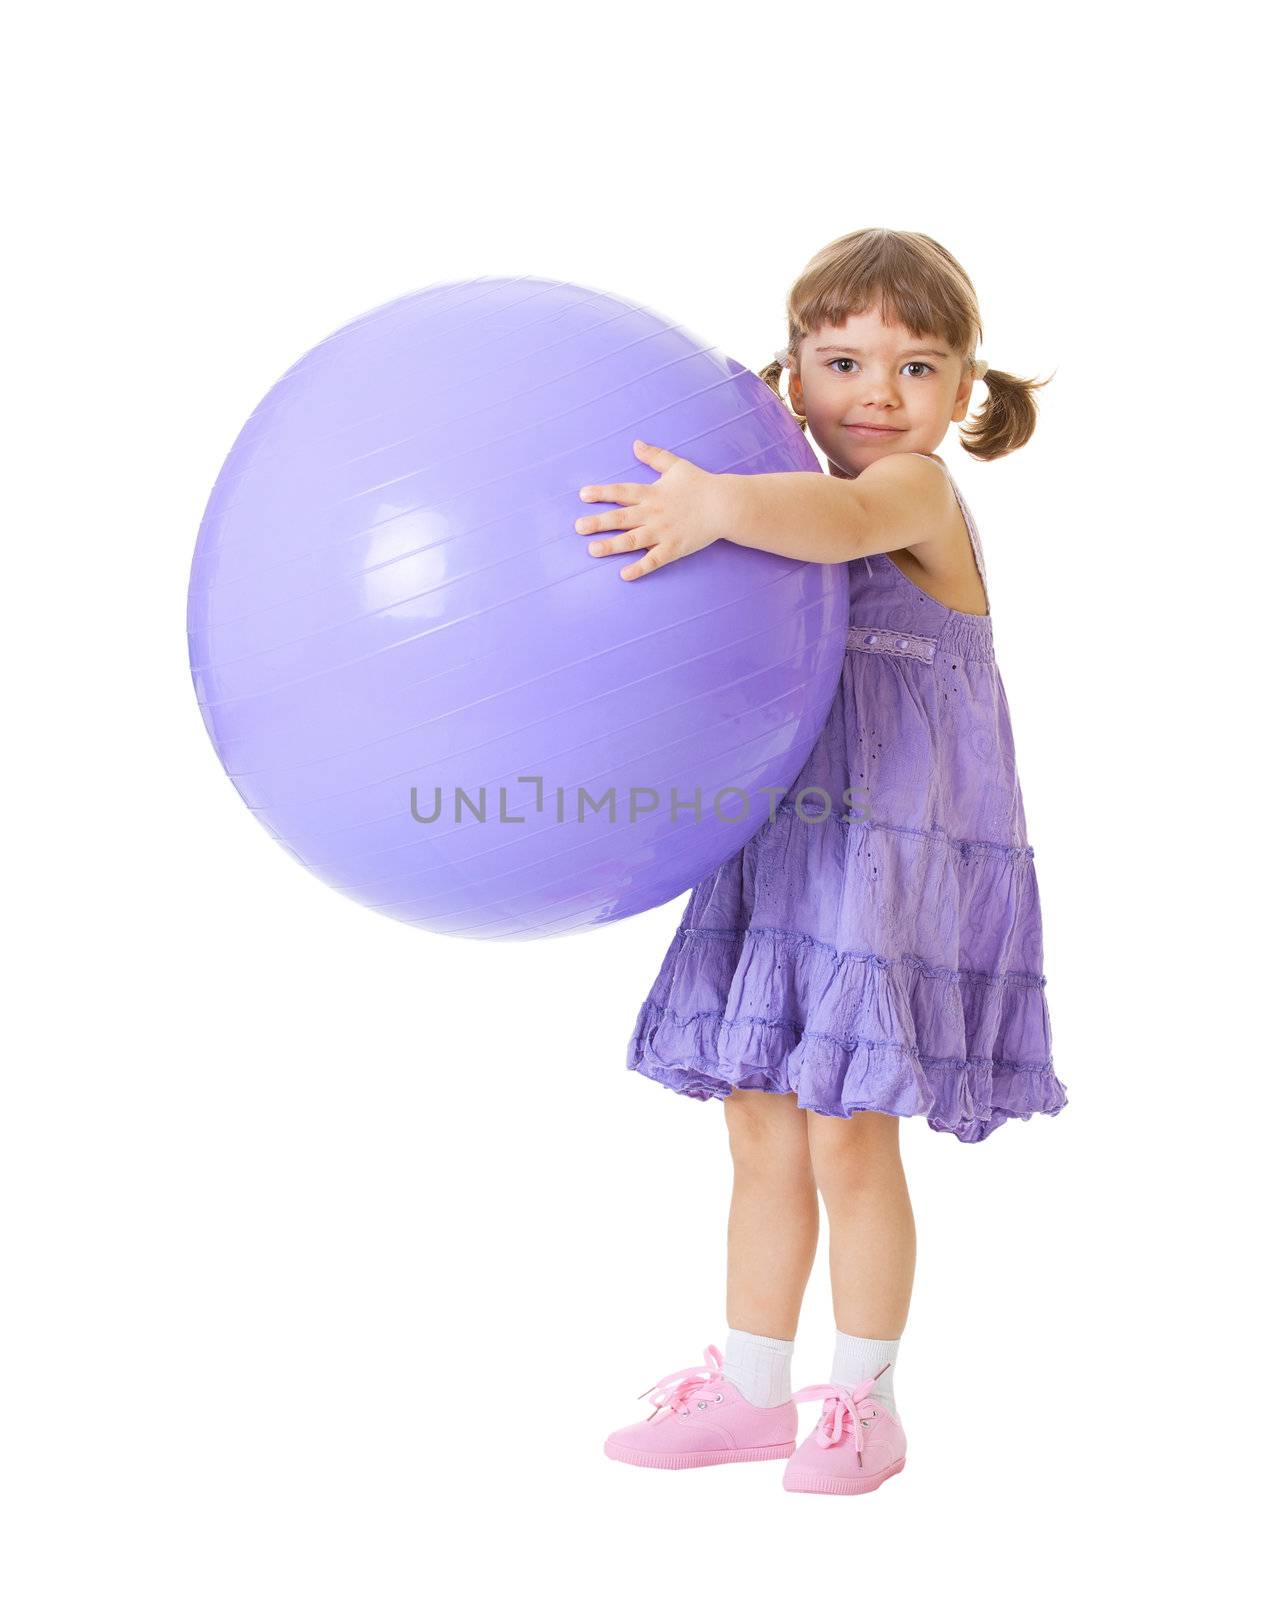 Little girl with a big purple ball by pzaxe